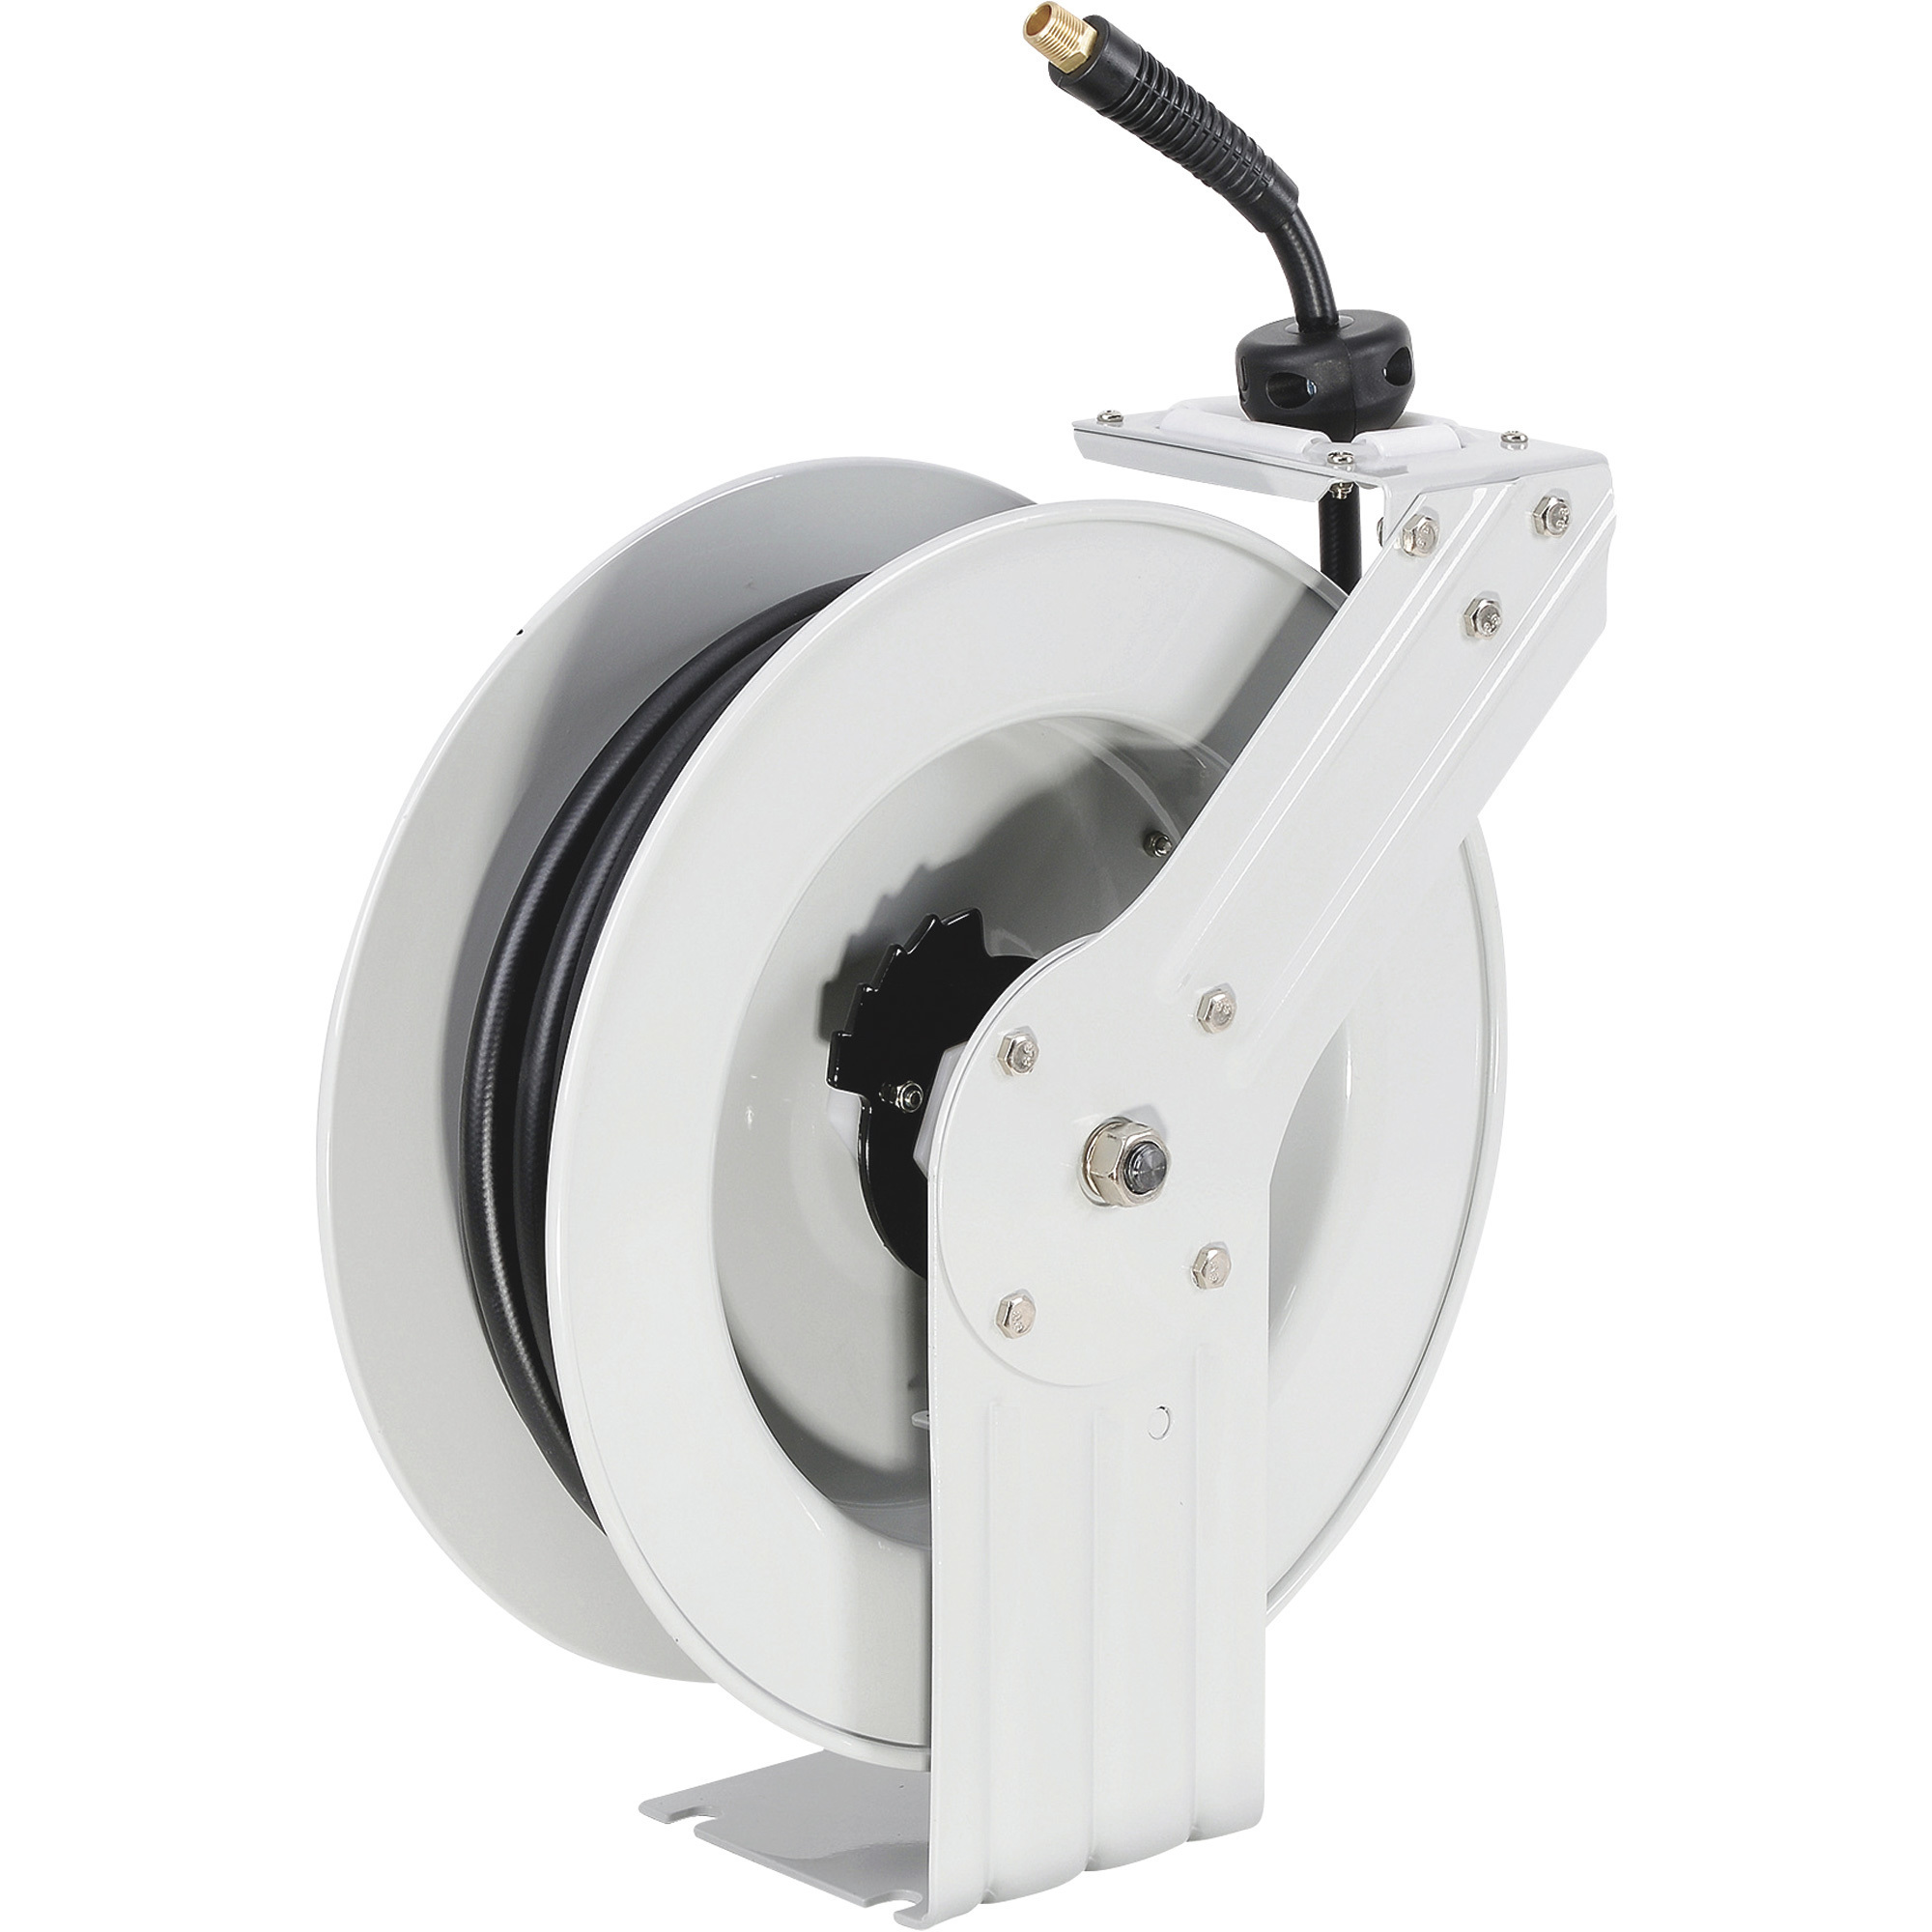 Klutch Auto-Rewind Air Hose Reel, with 3/8in. x 50ft. Hybrid Polymer Hose,  300 Max. PSI